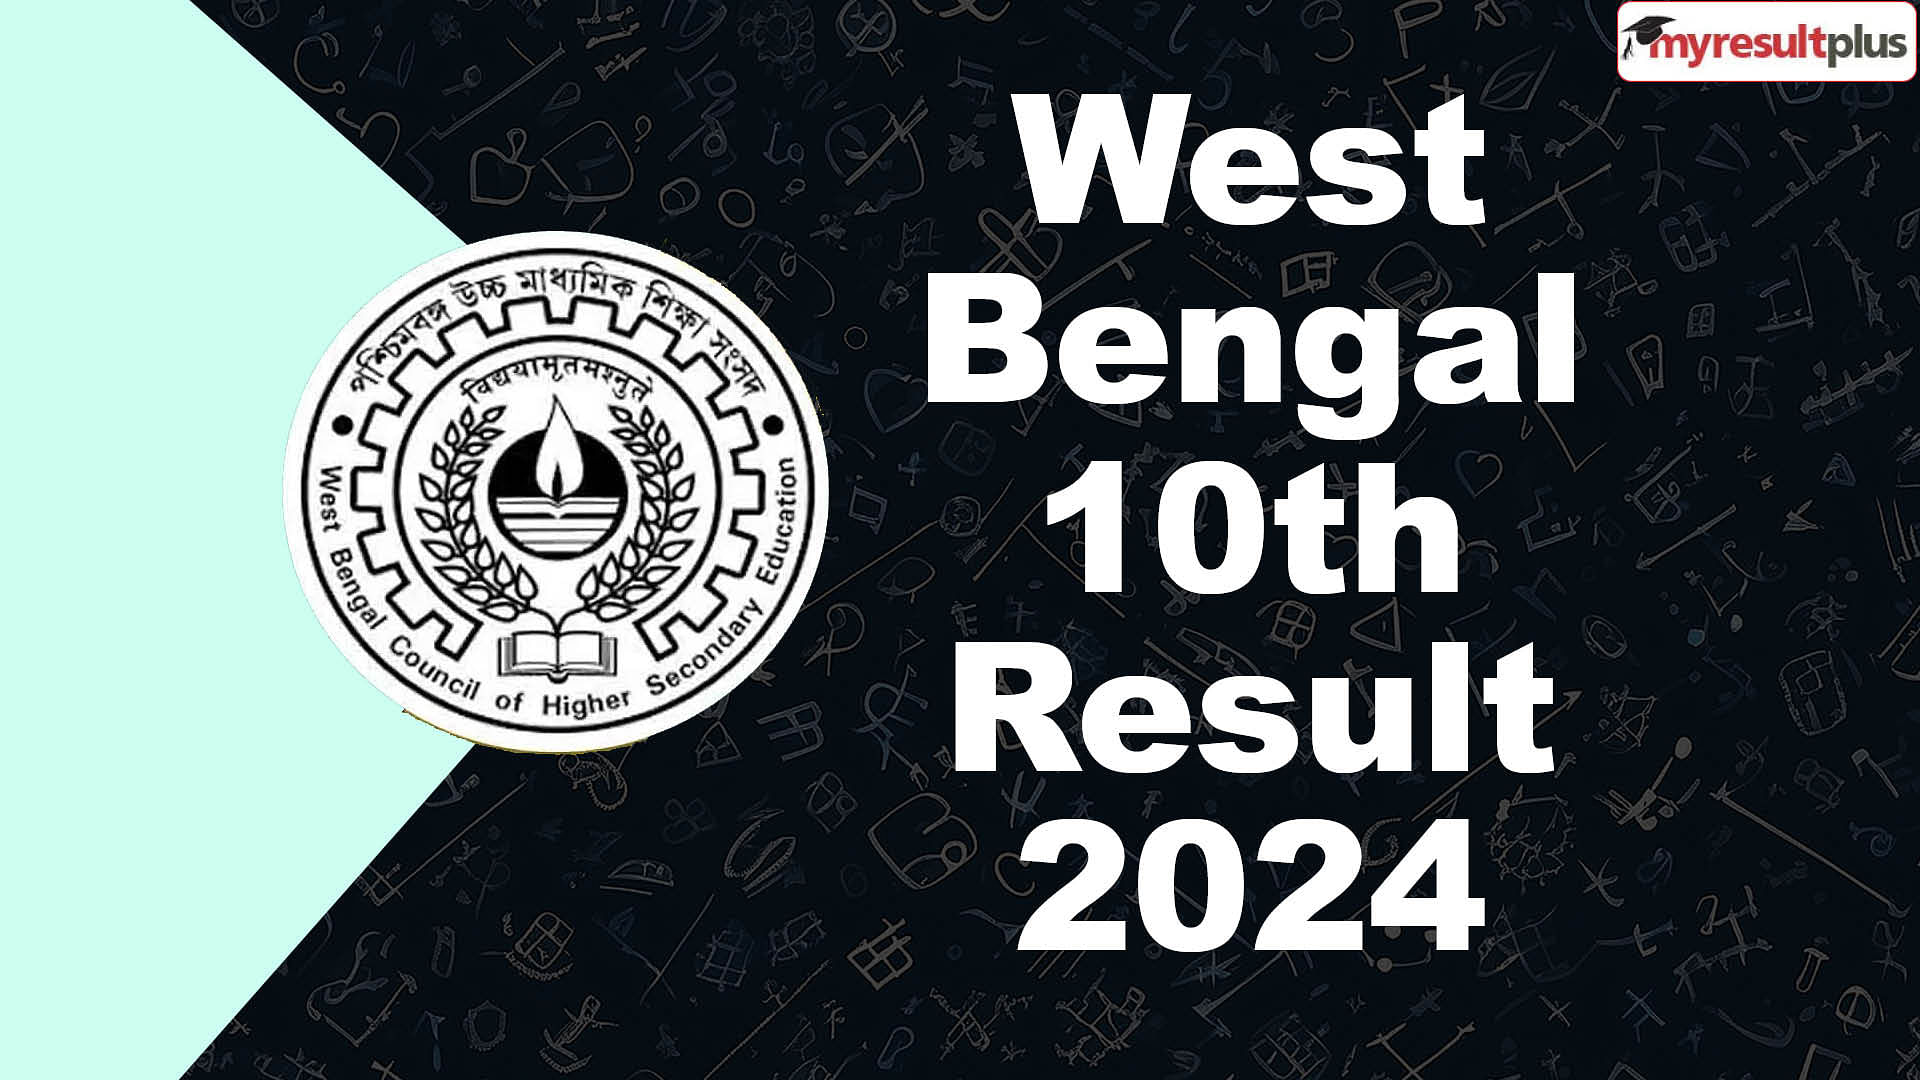 West Bengal 10th Result 2024 will be released on 2 May at 9 am, Read the official notice here